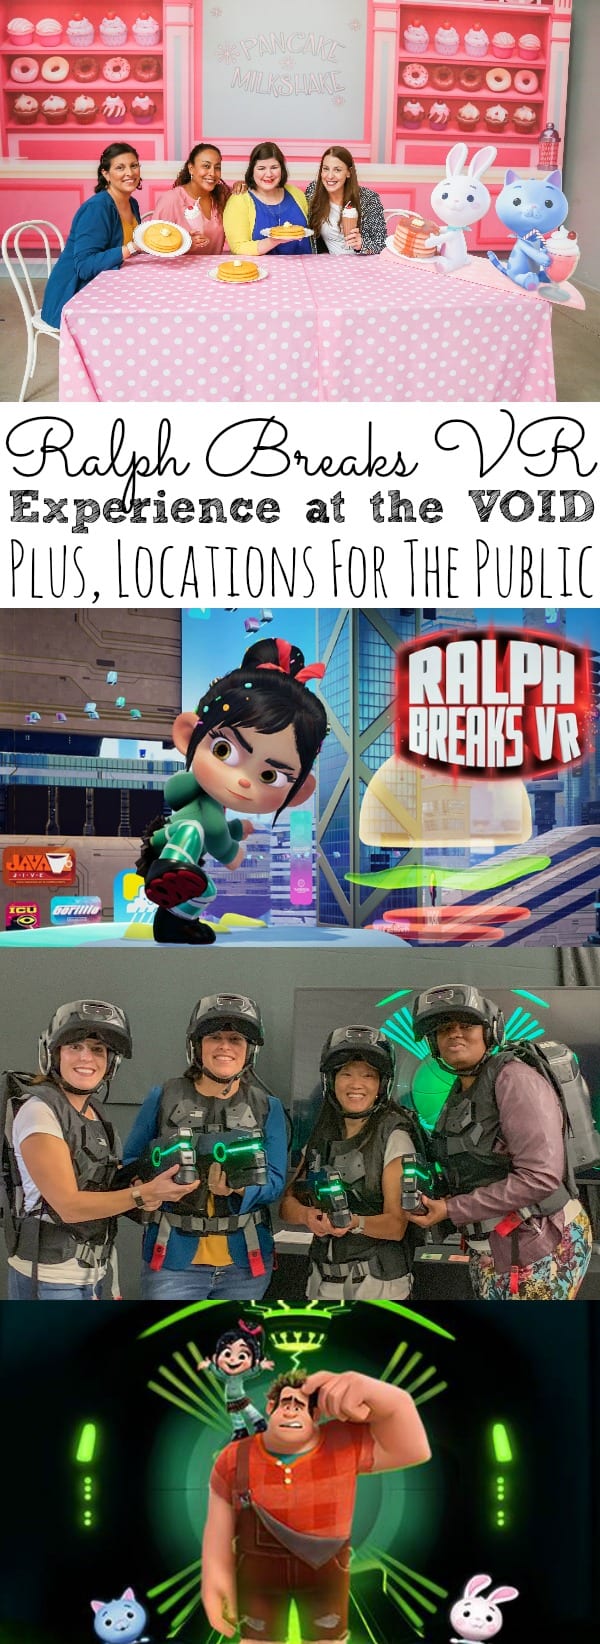 Ralph Breaks VR Experience At The VOID